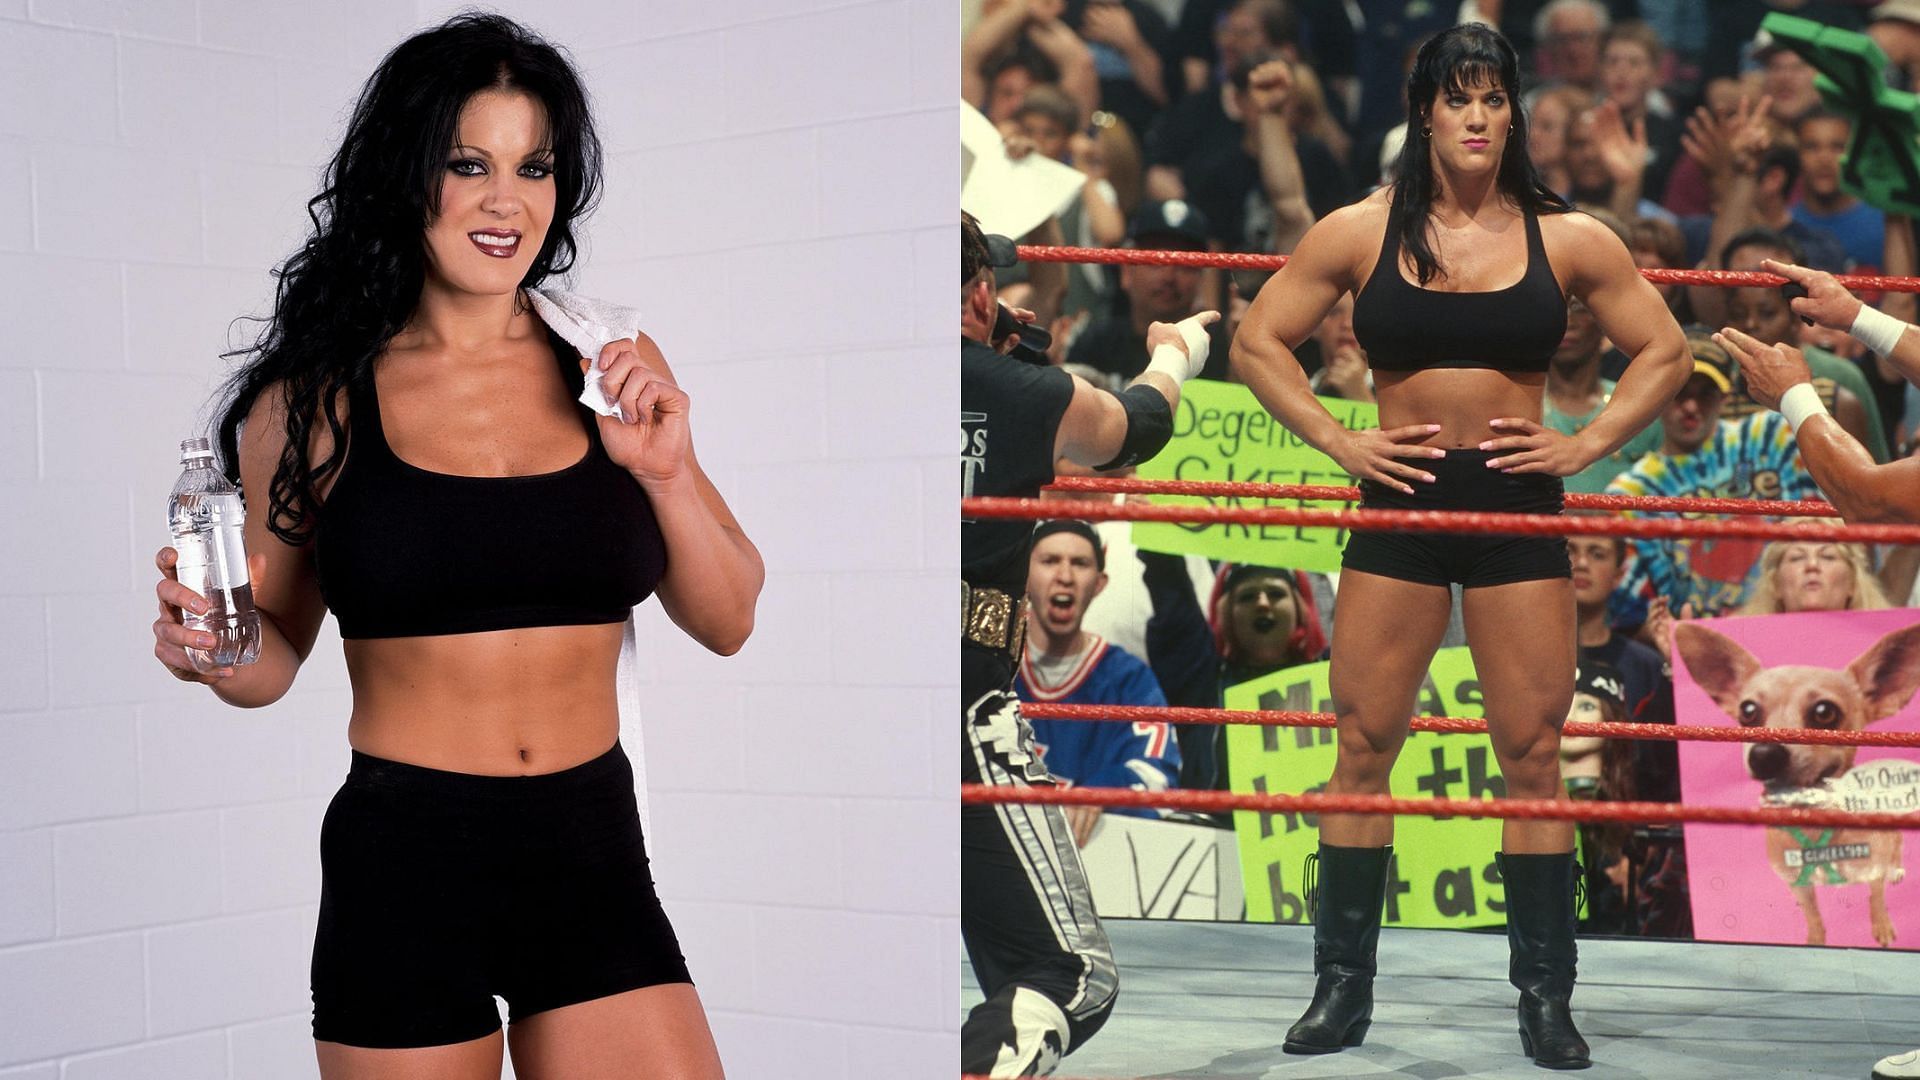 Two-time WWE Intercontinental Champion Chyna, real name Joan Marie Laurer